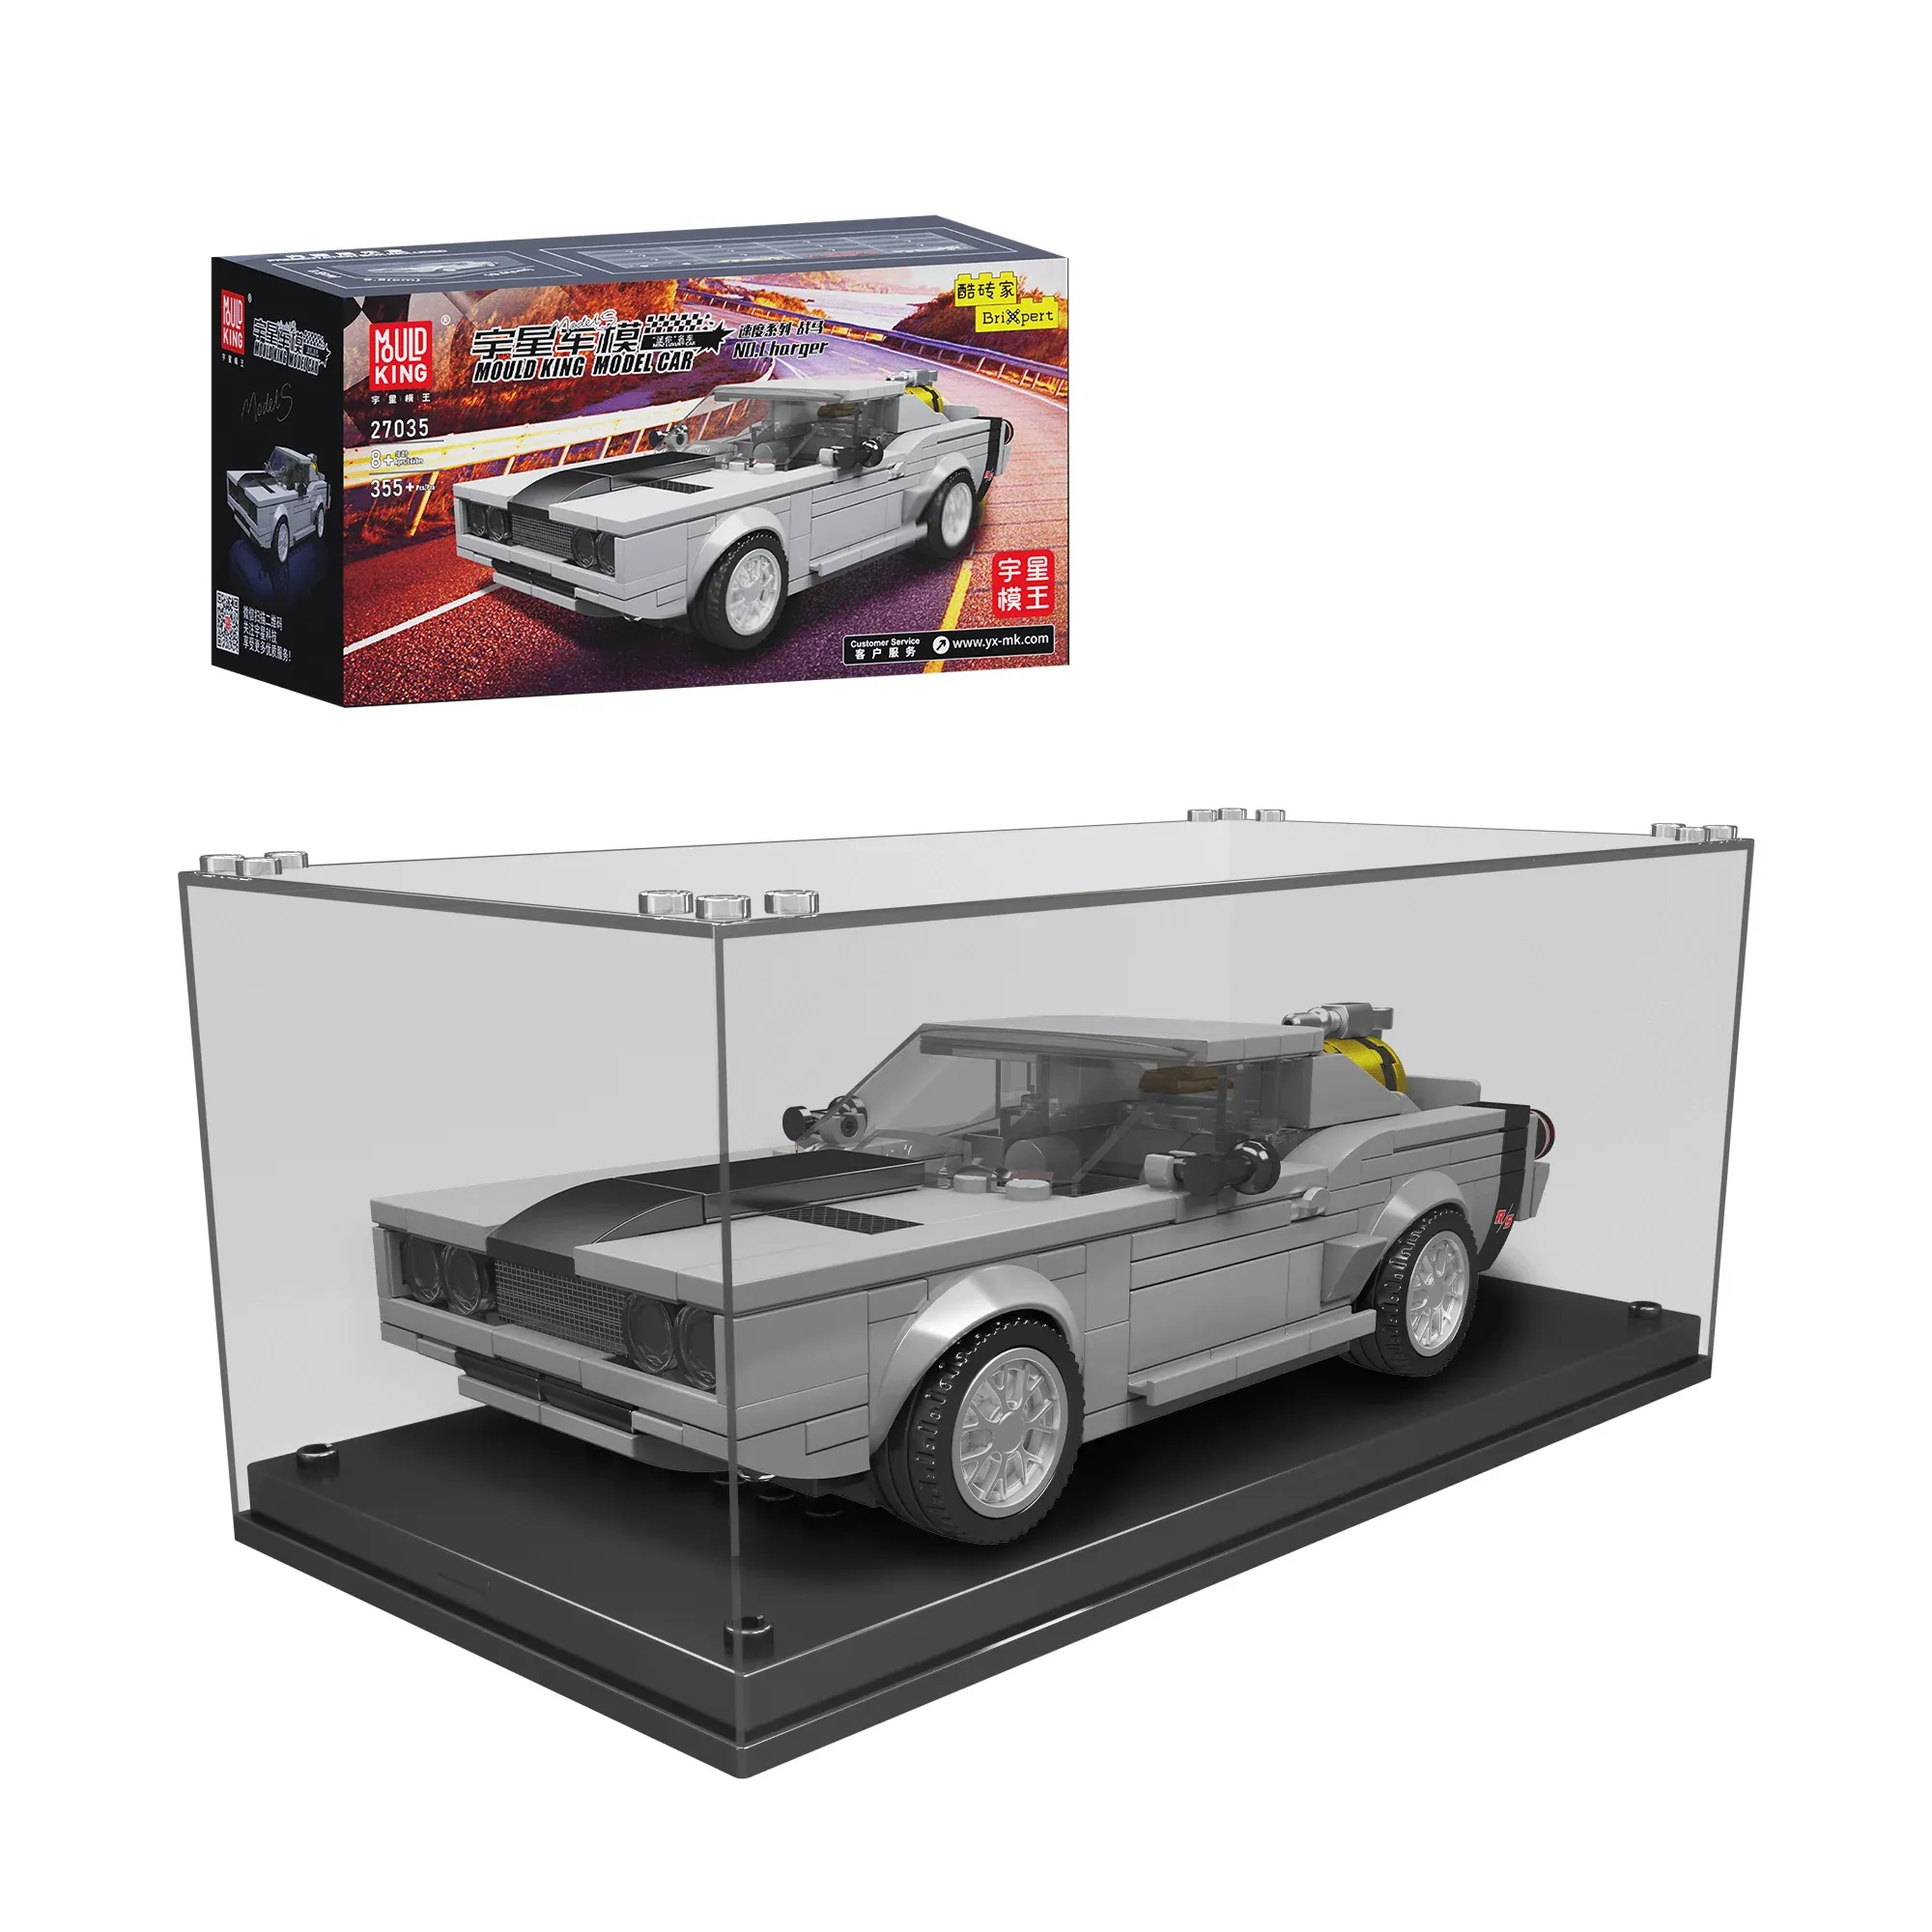 Mould King - Charger Sports car | Set 27035